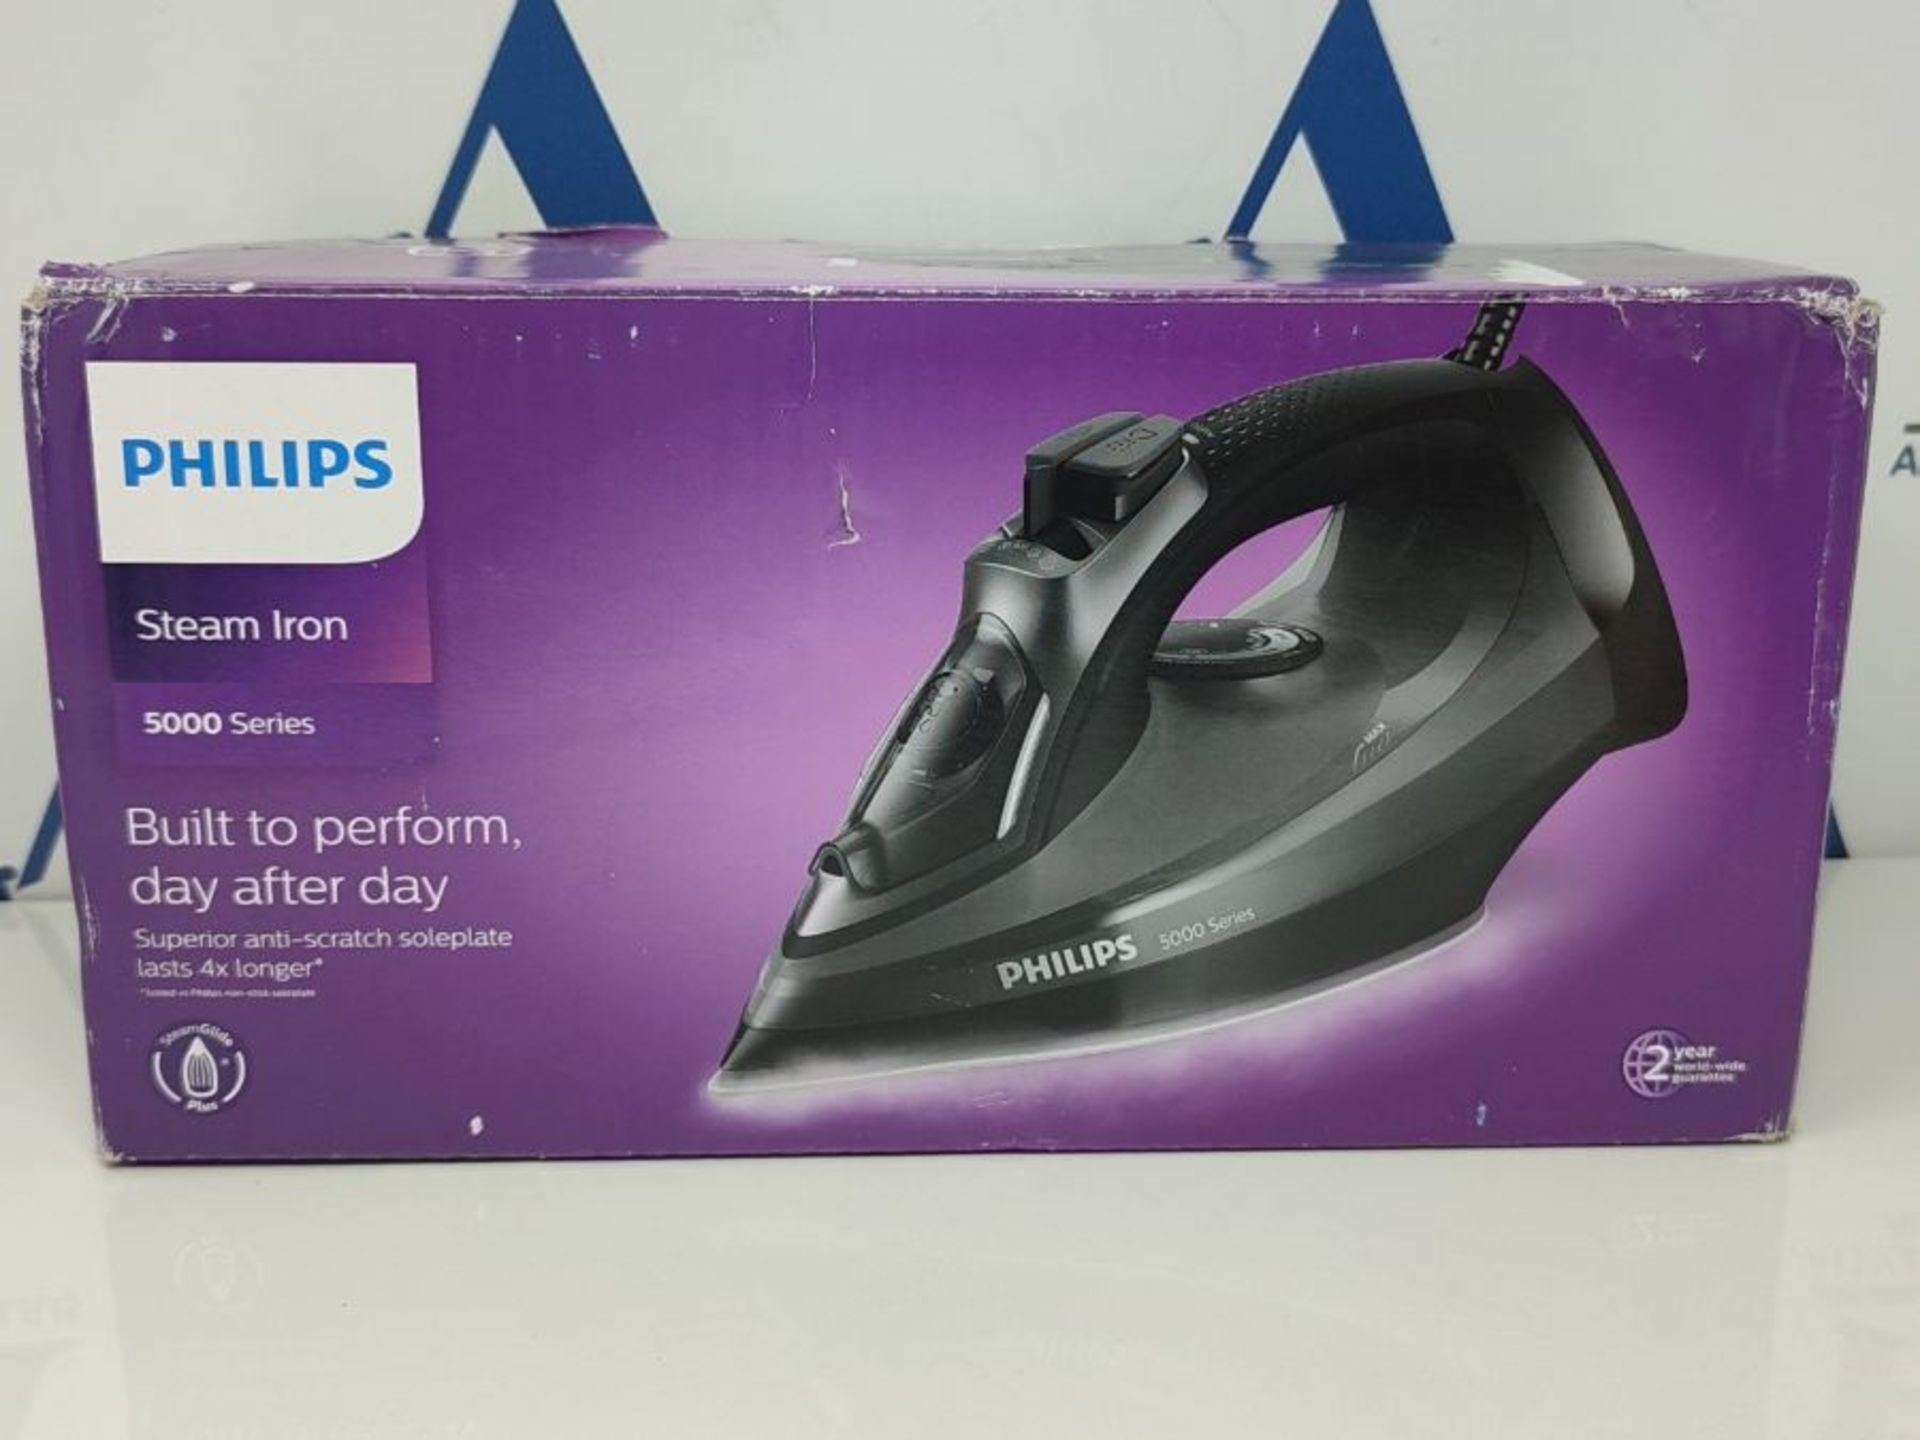 Philips Steam Iron Series 5000, 2600 W power, 45 g/min Continuous Steam, 200 g Steam B - Image 2 of 3